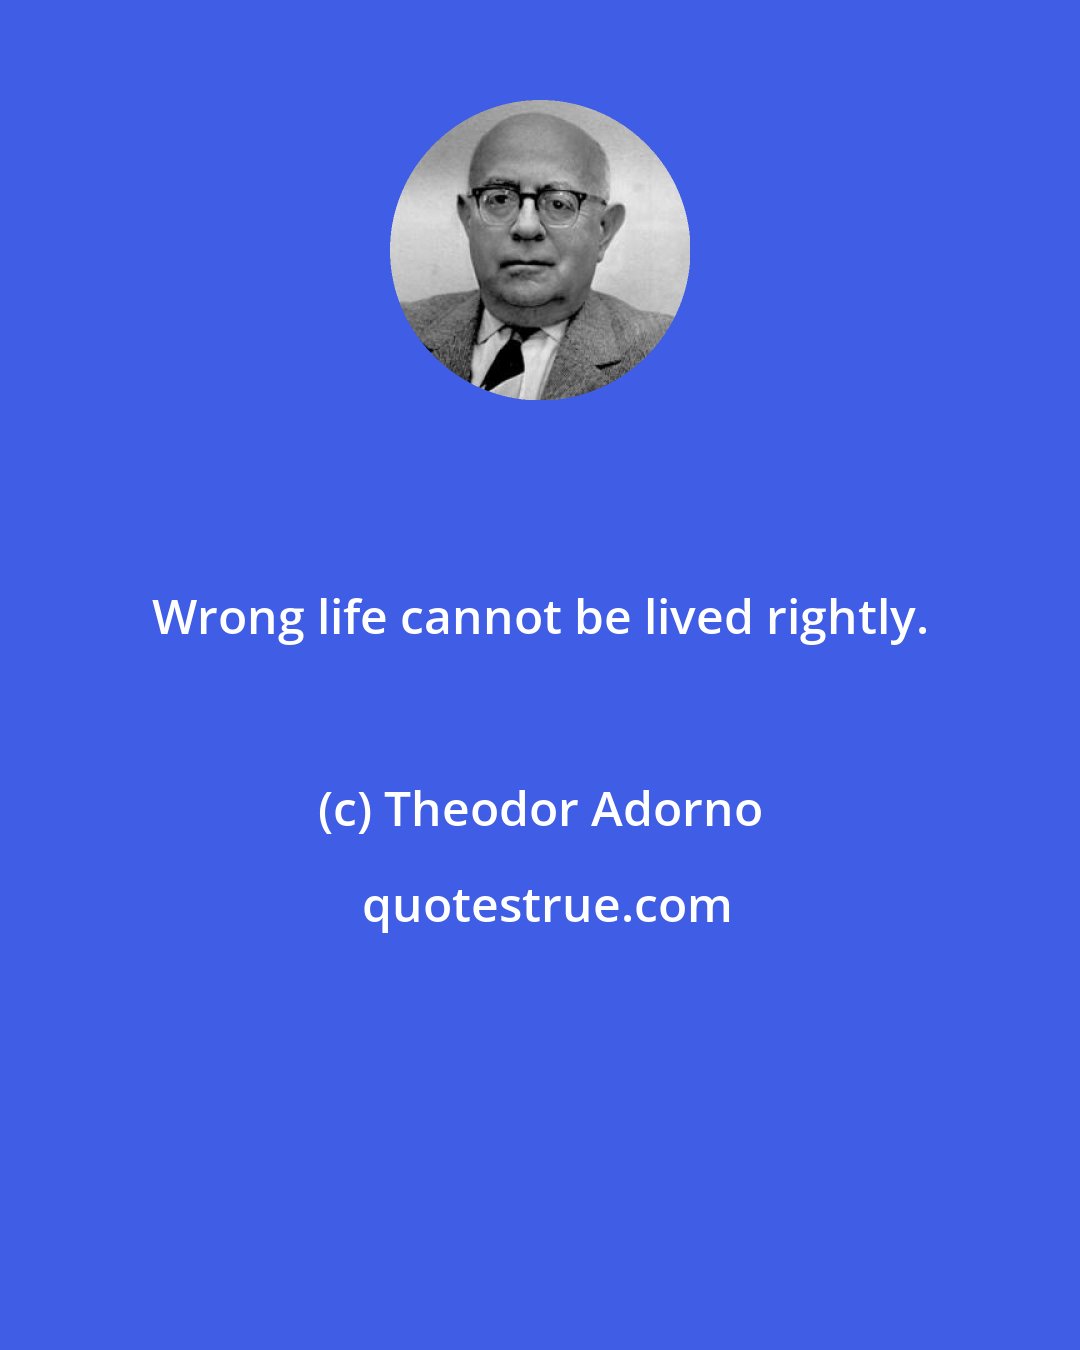 Theodor Adorno: Wrong life cannot be lived rightly.